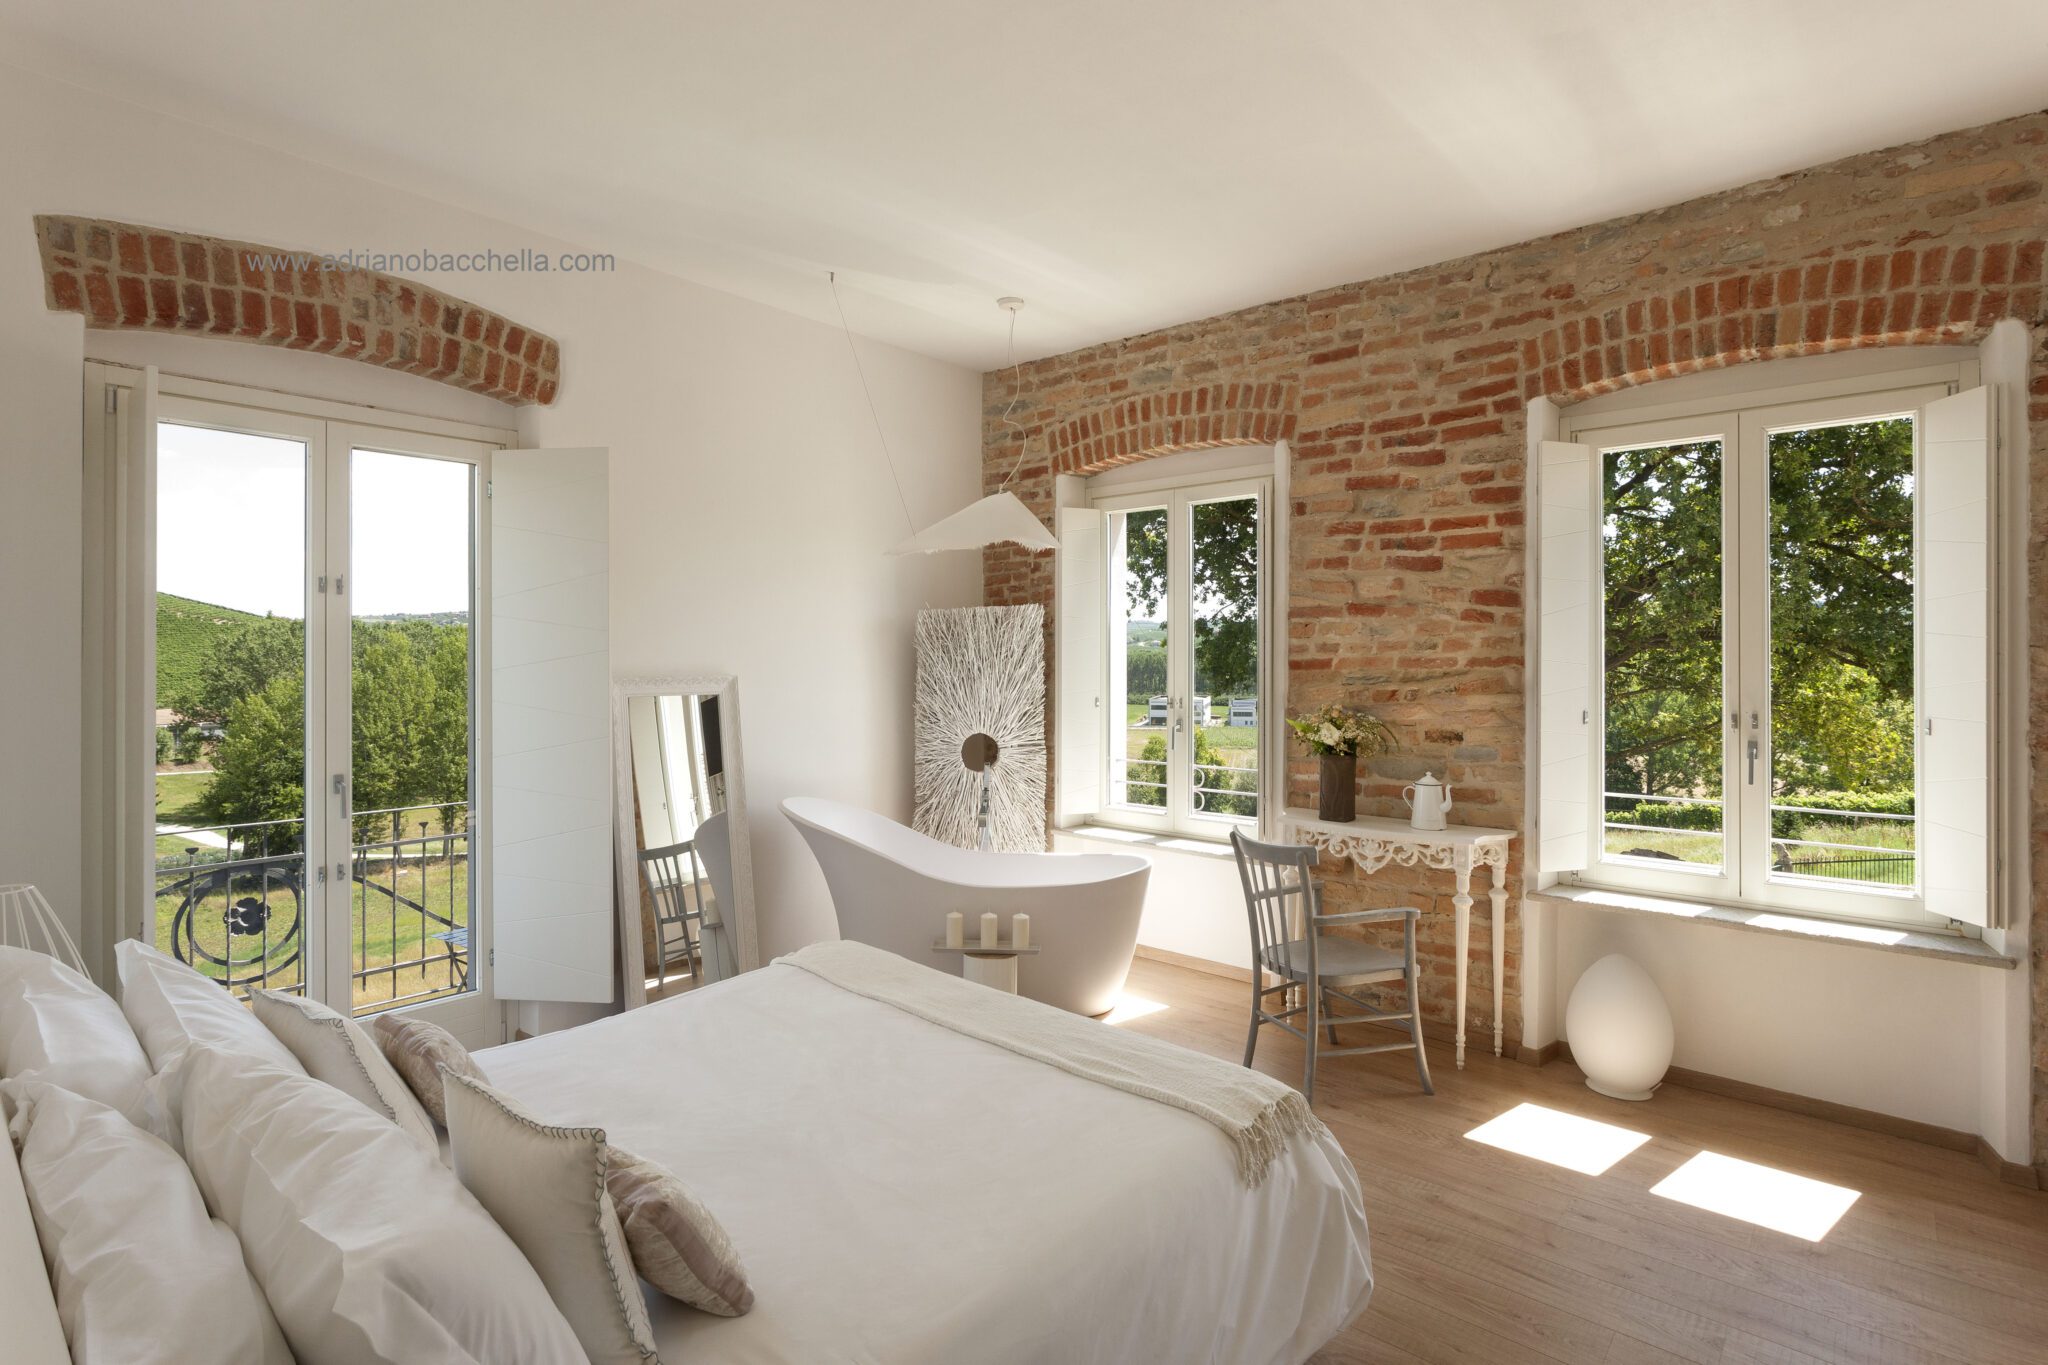 Nest Italy:B&B Country House nelle Langhe